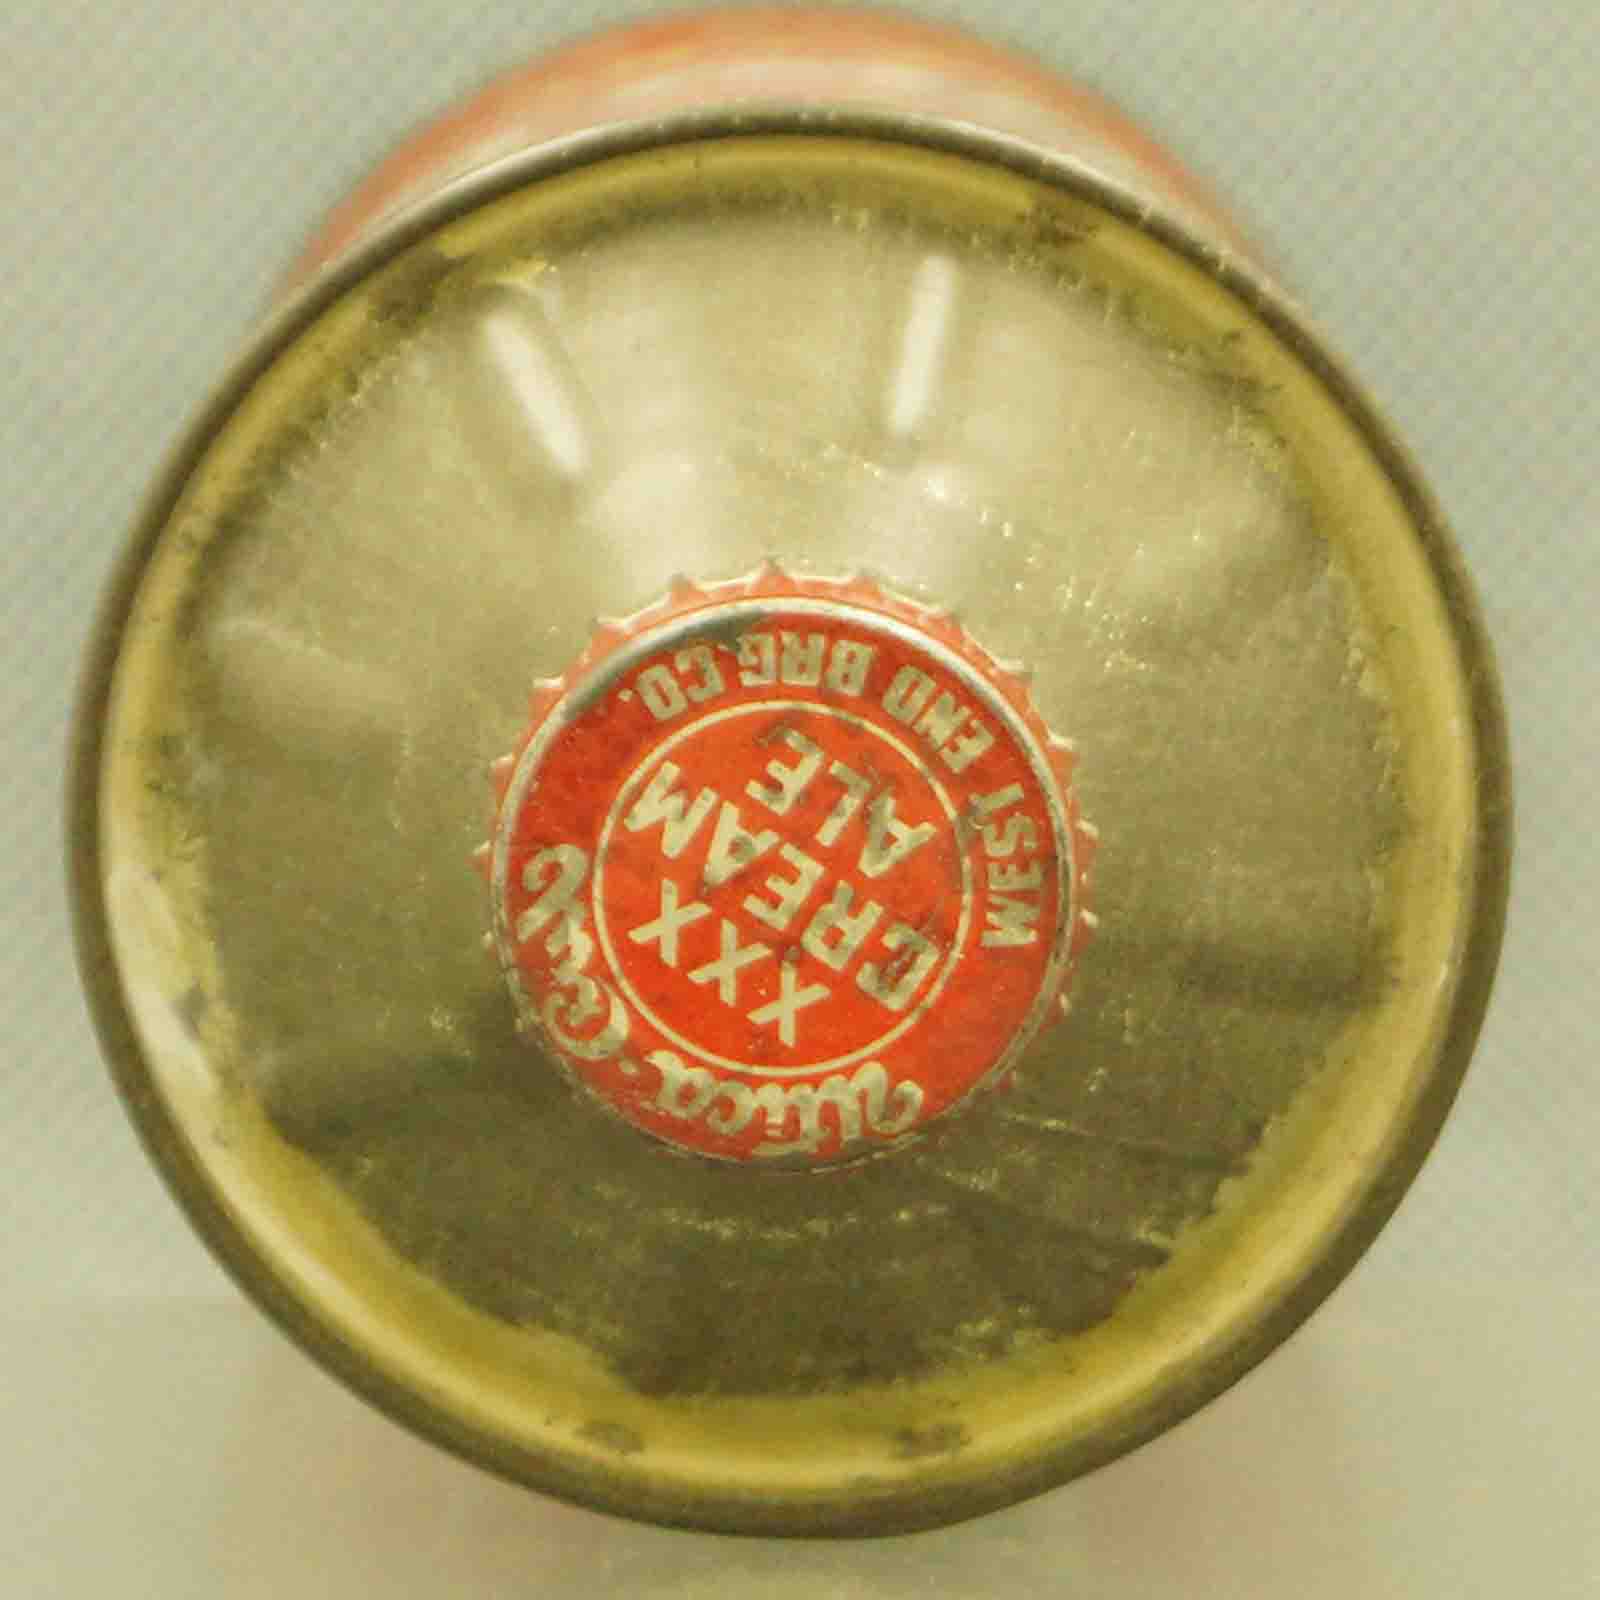 utica club 188-1 cone top beer can 5